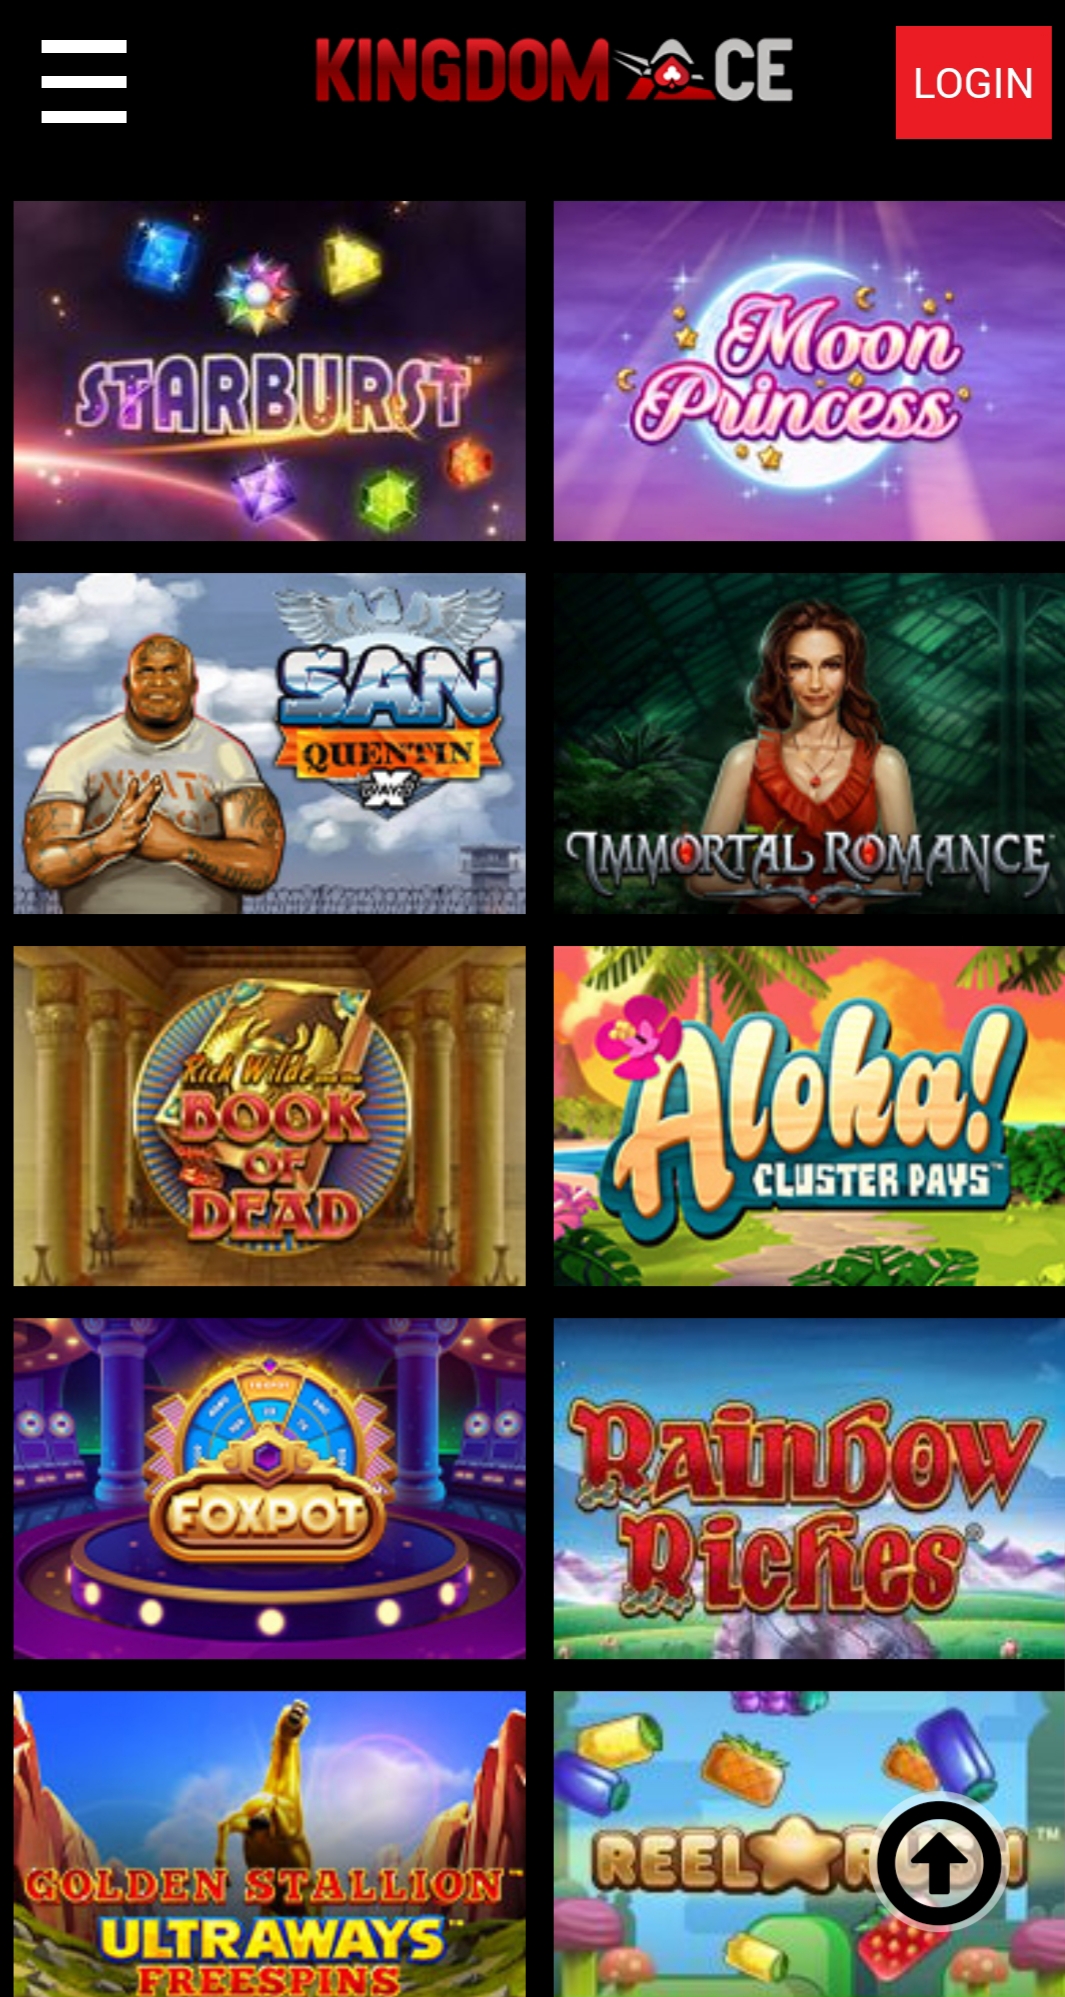 KingdomAce Casino Mobile Games Review